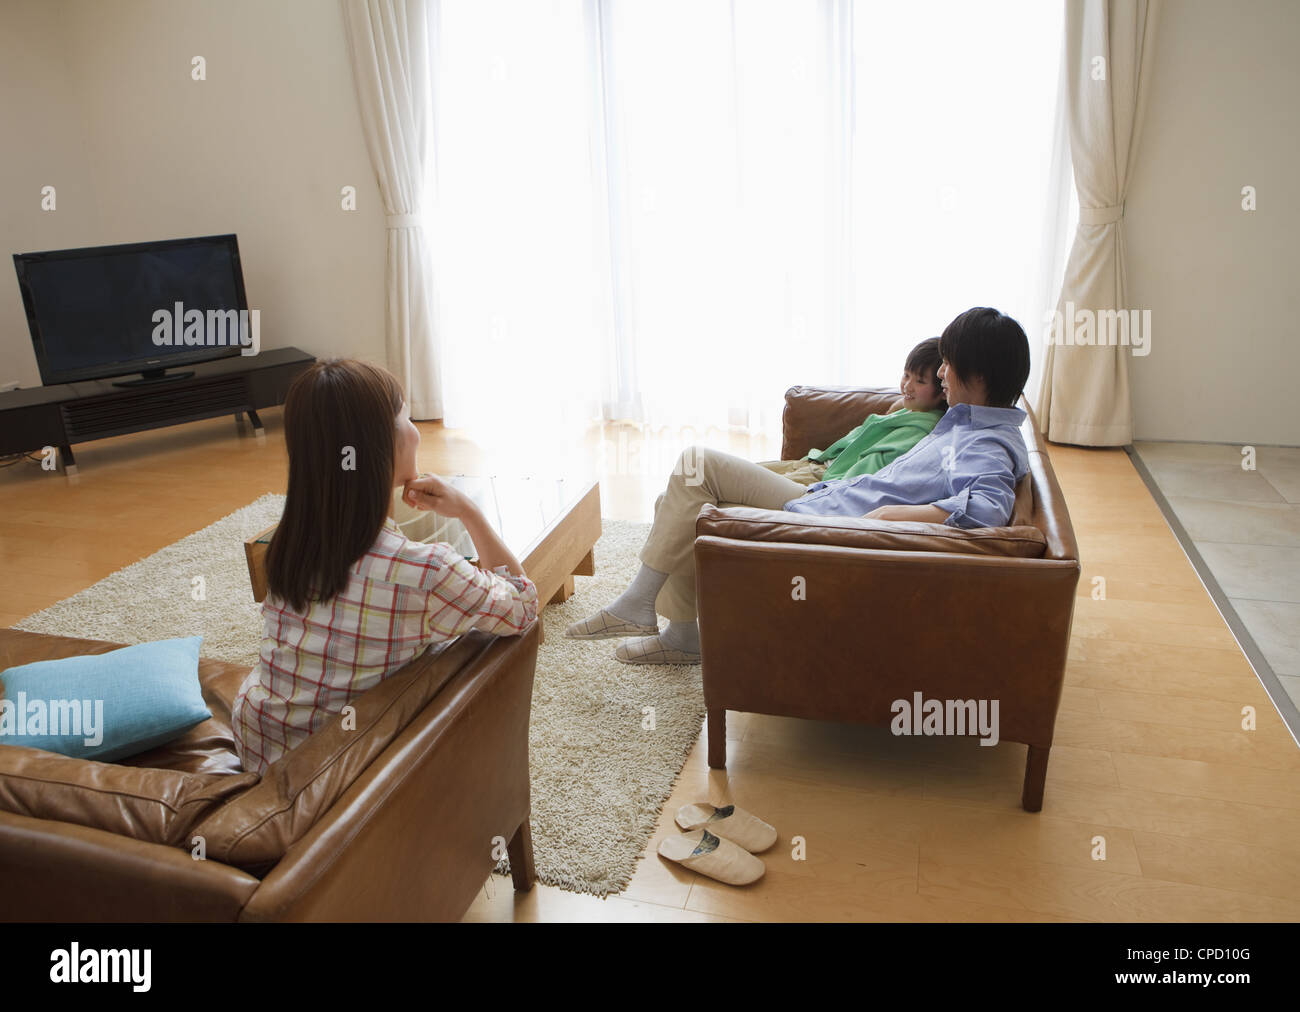 Family relaxing in a living room Banque D'Images